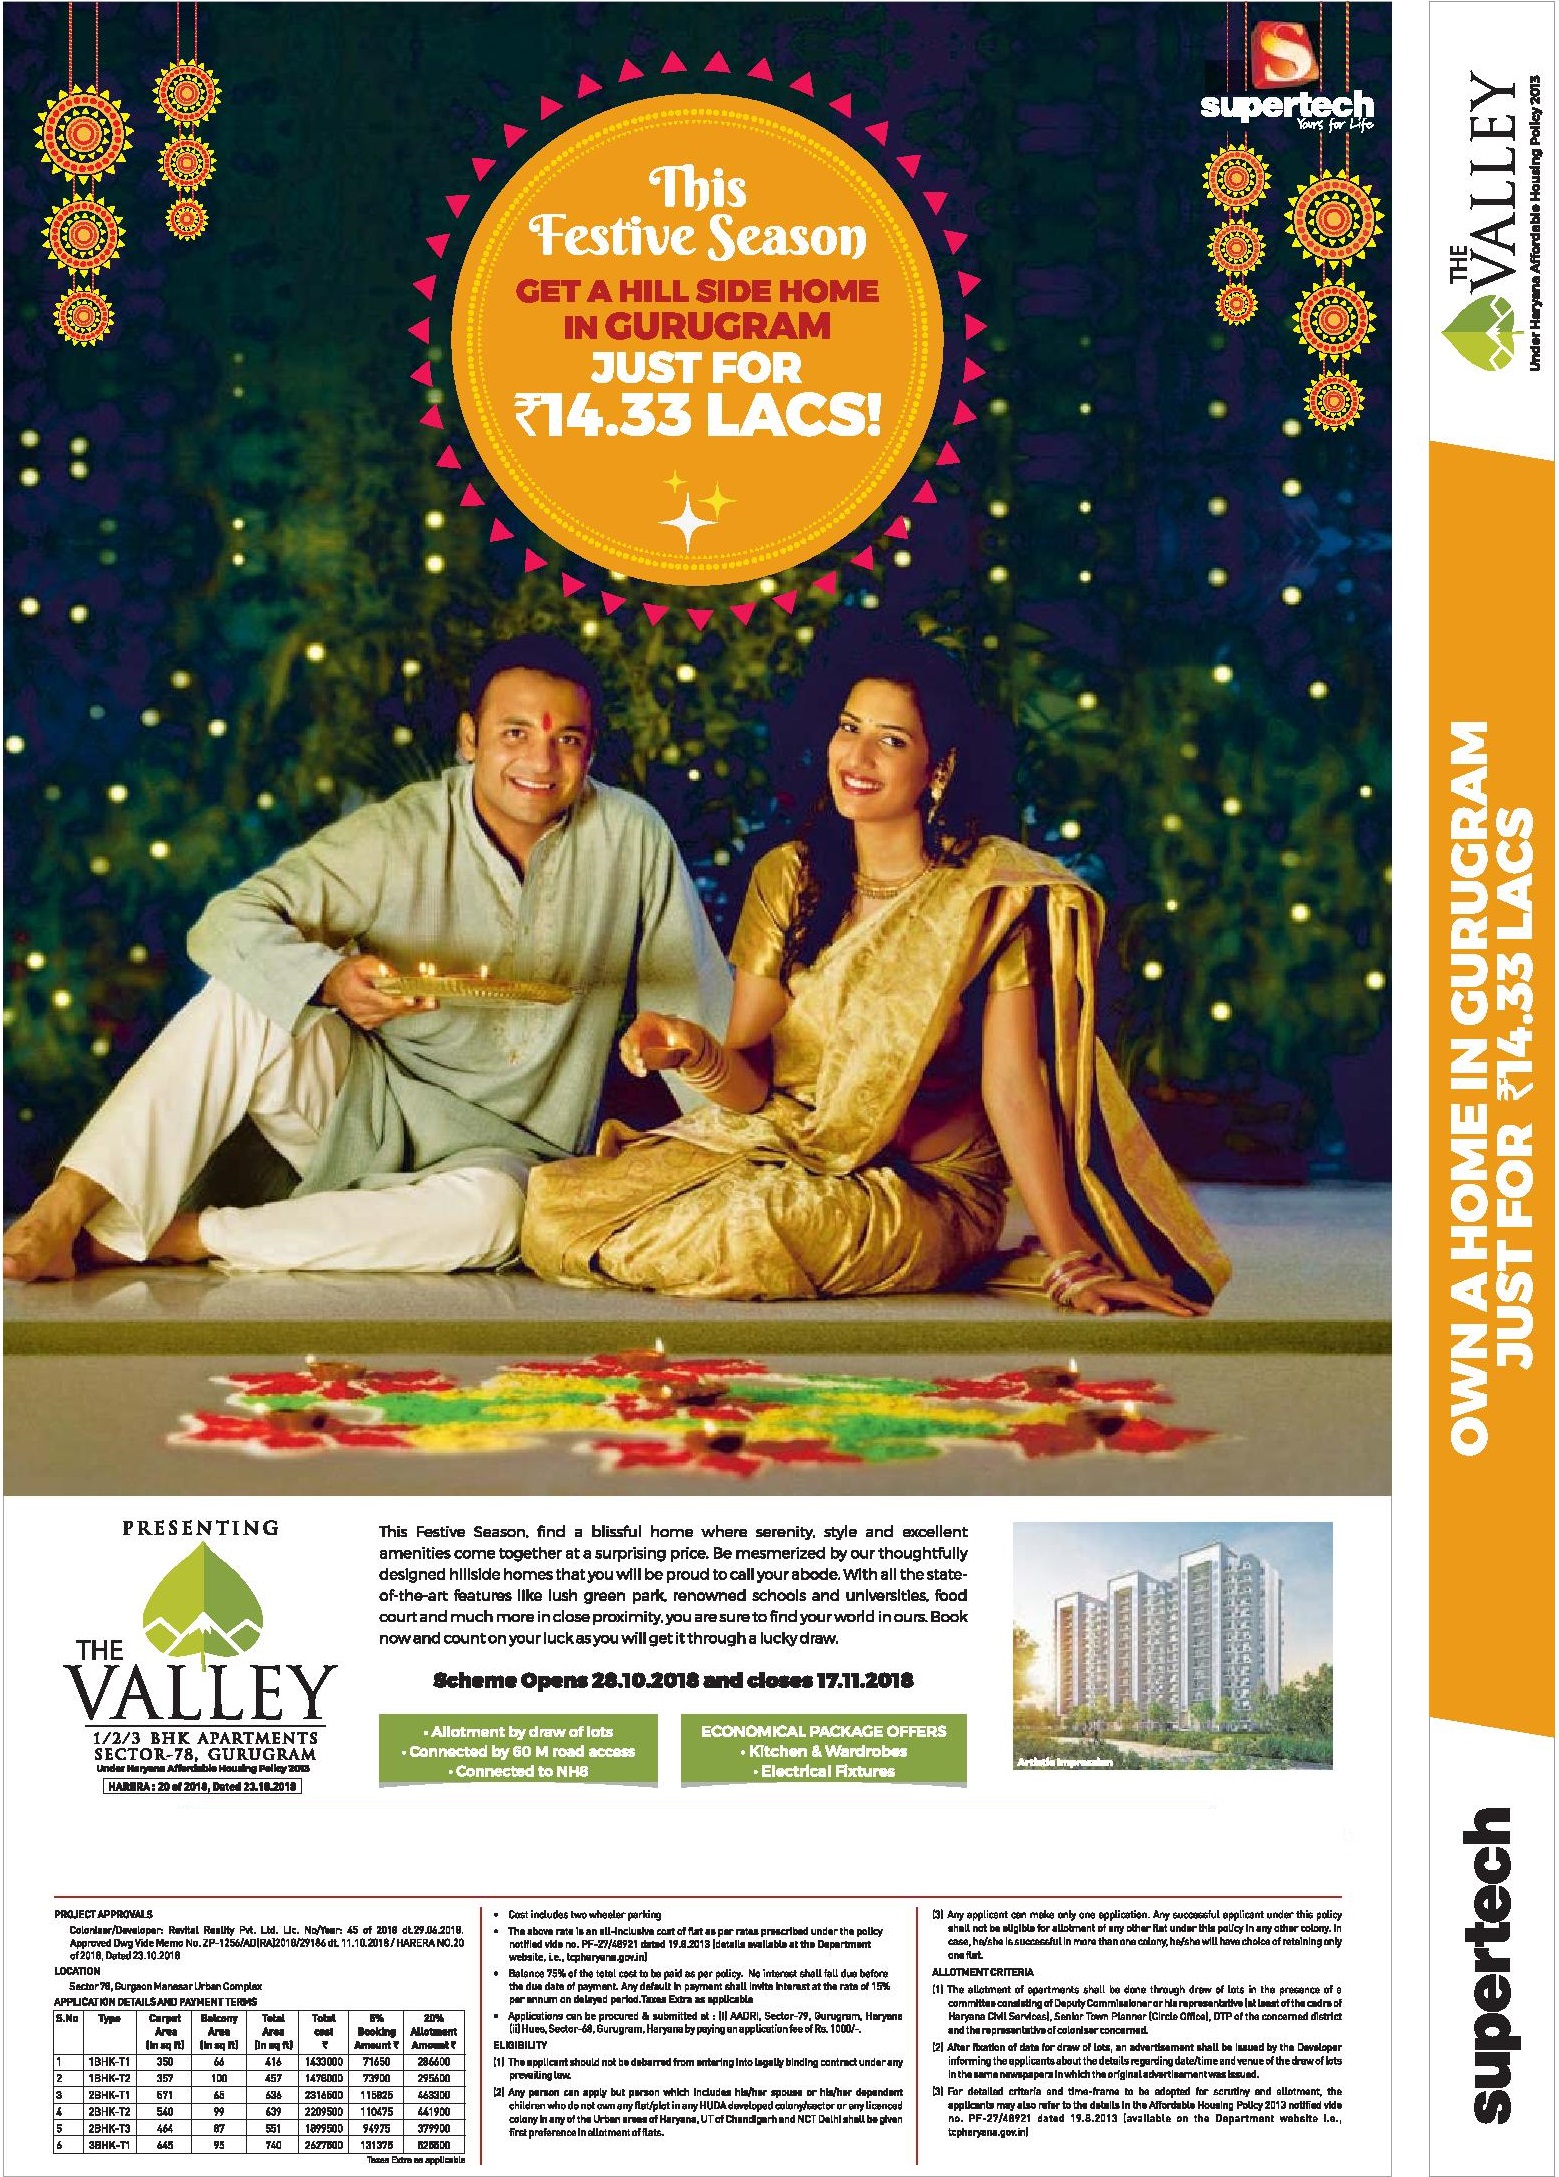 Supertech presenting 1/2/3 bhk apartments @ Rs. 14.33 lakhs at The Valley in Gurgaon